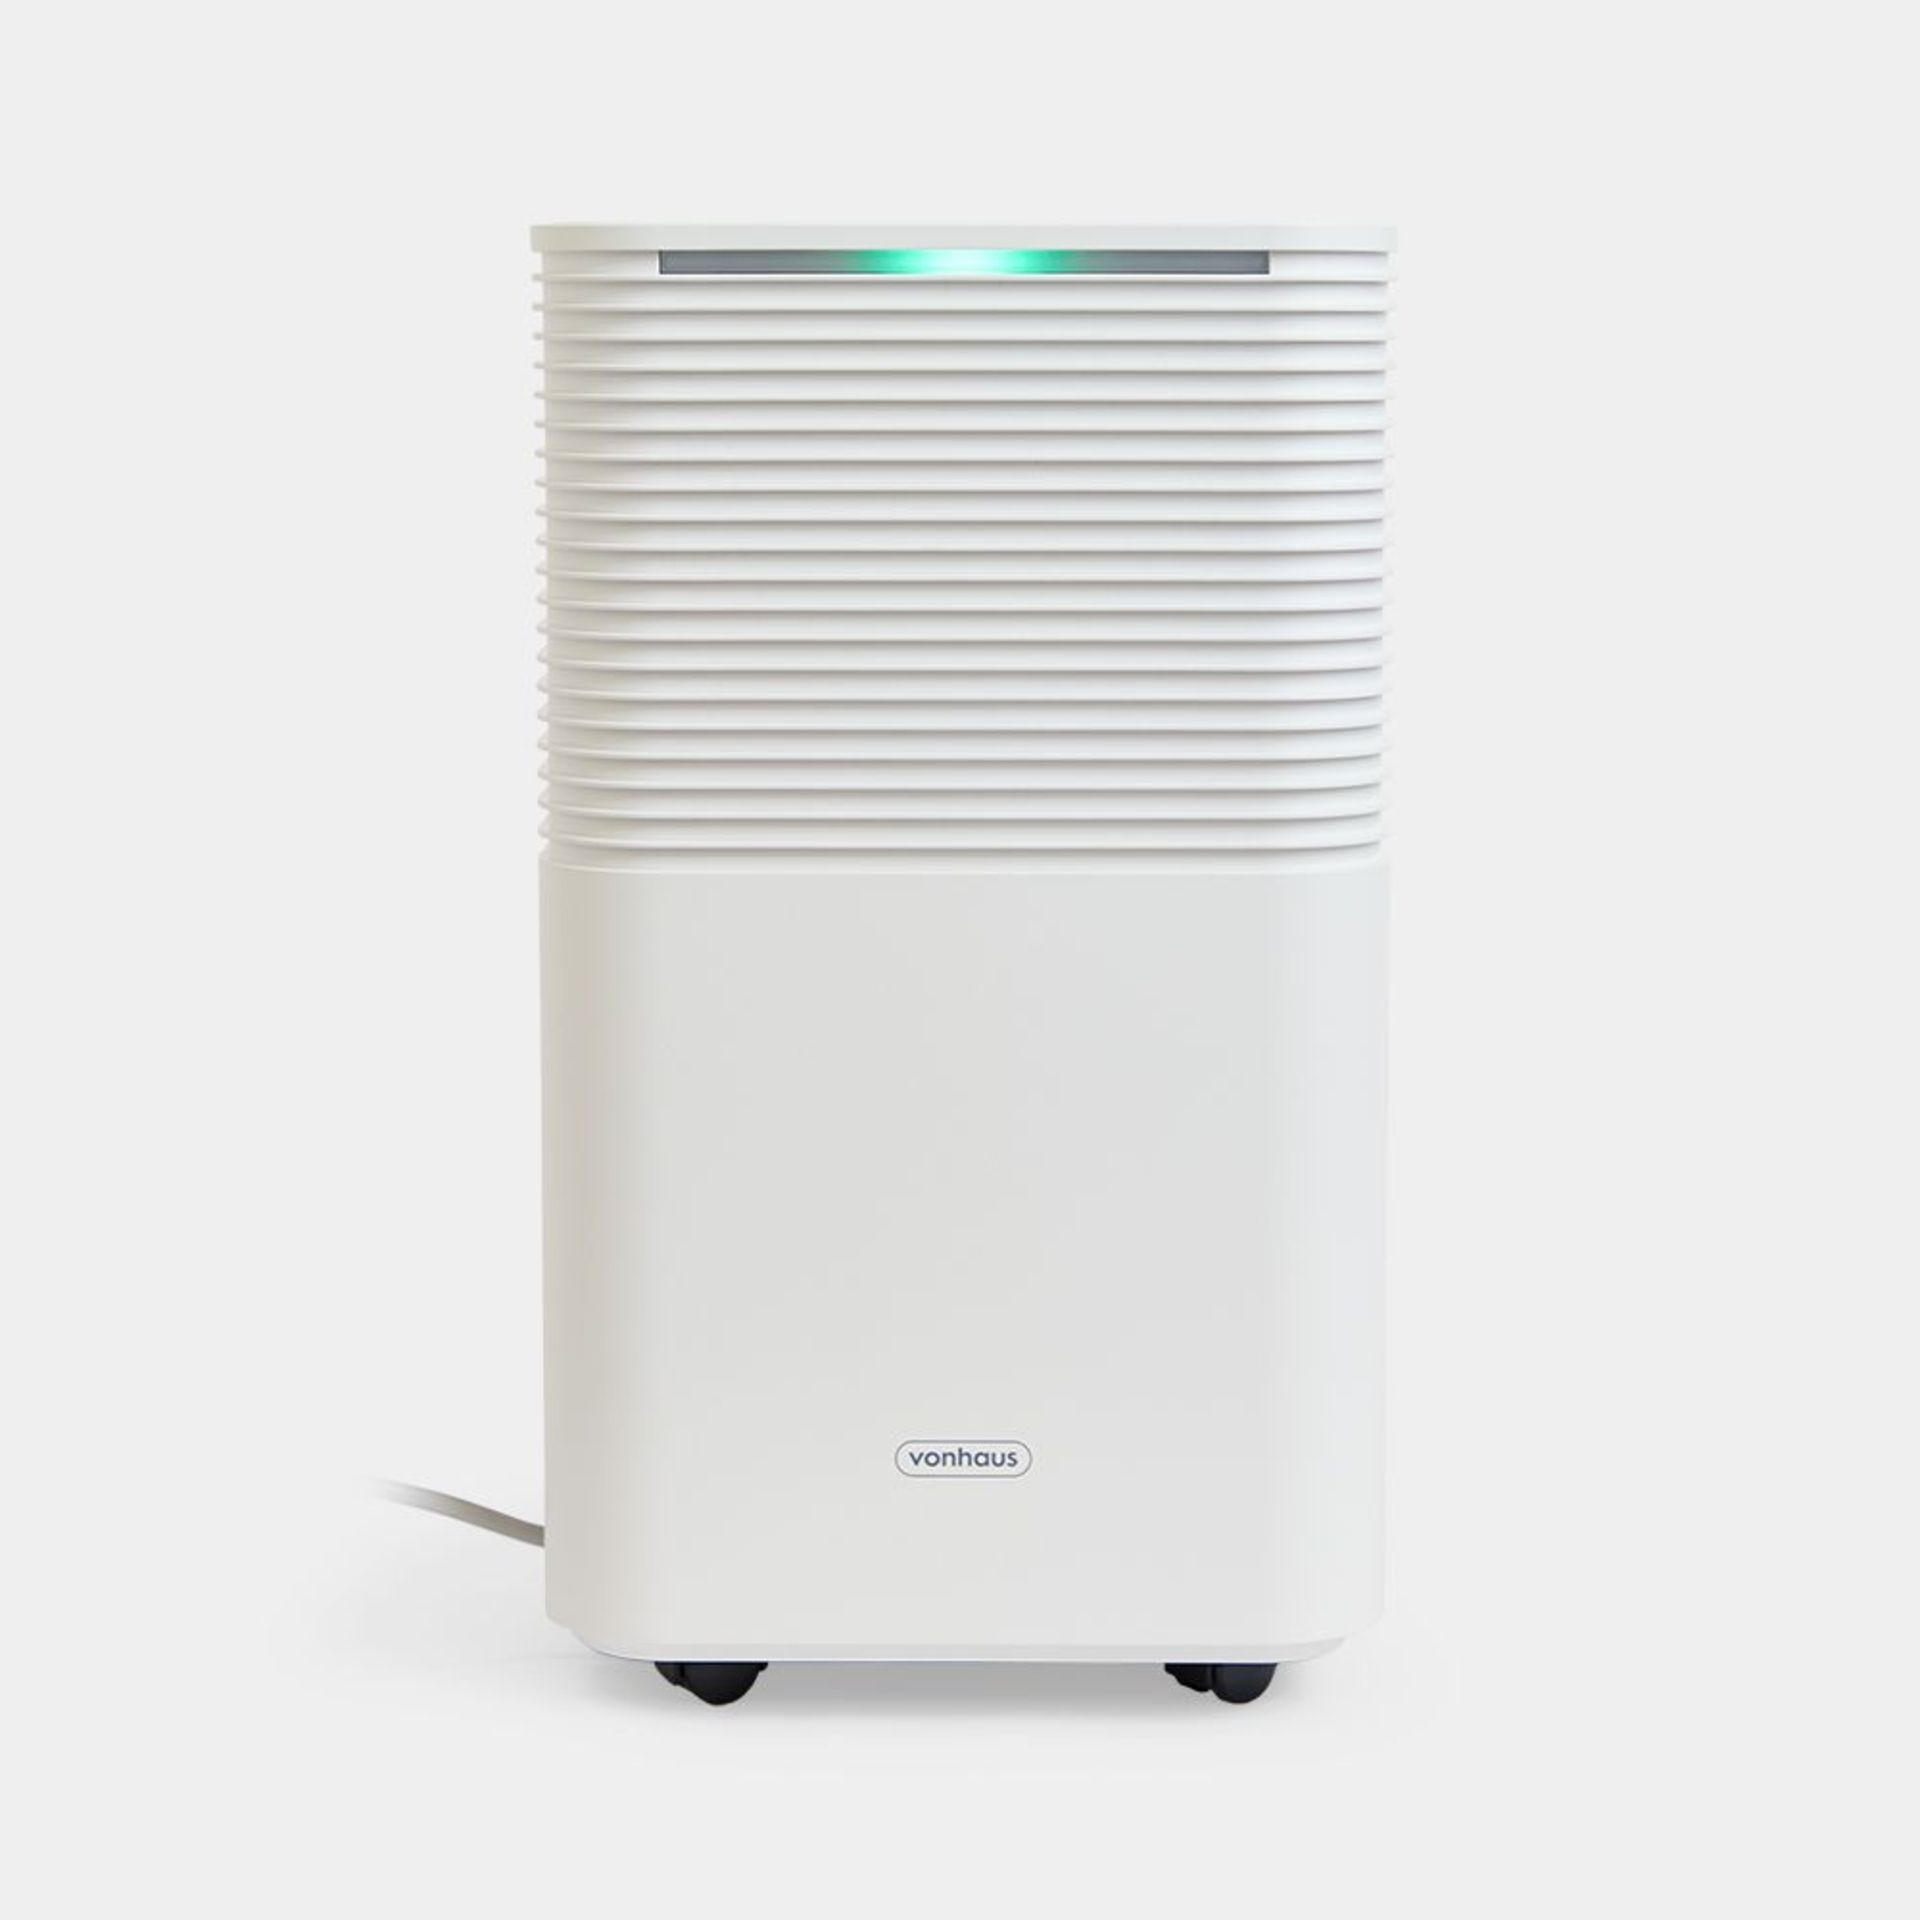 12L Dehumidifier. - PW. With a simple LED display, this dehumidifier is easily controlled and